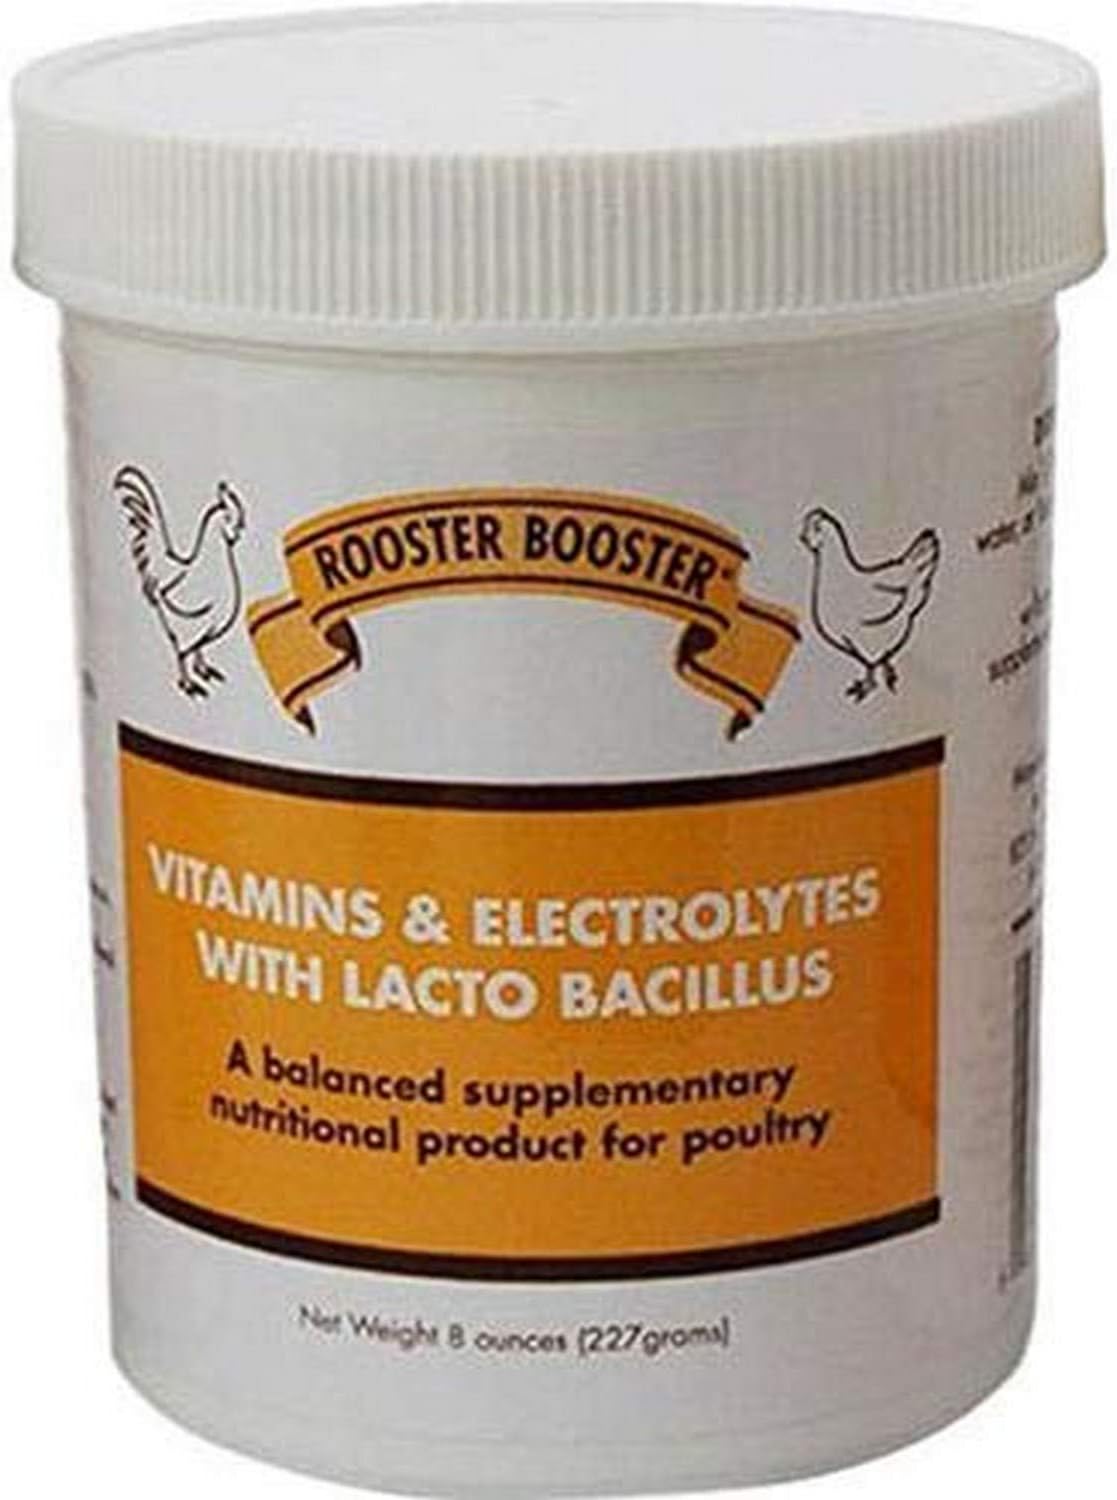 Rooster Booster Vitamins and Electrolytes with Lactobacillus, Natural, 8 oz. : Pet Supplies